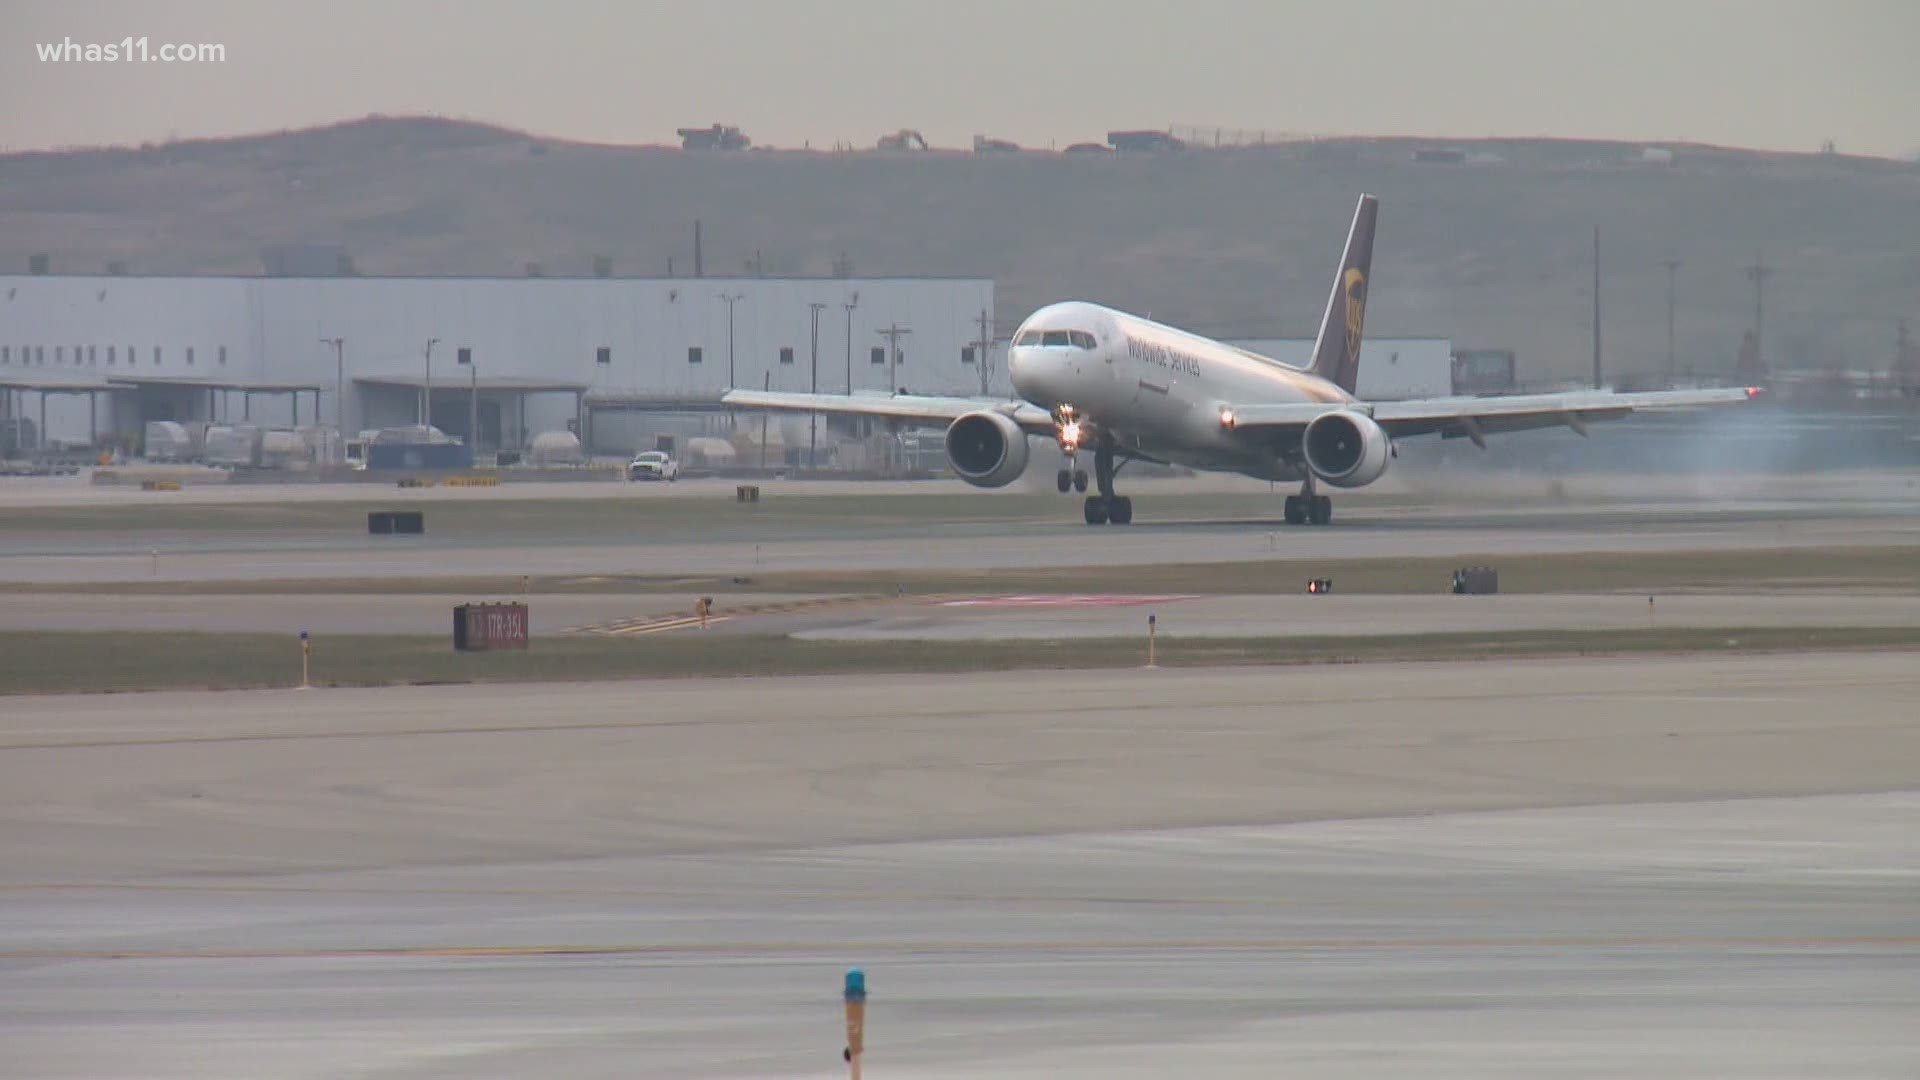 The first shipment of the vaccine is expected to be moving through Worldport beginning Sunday.